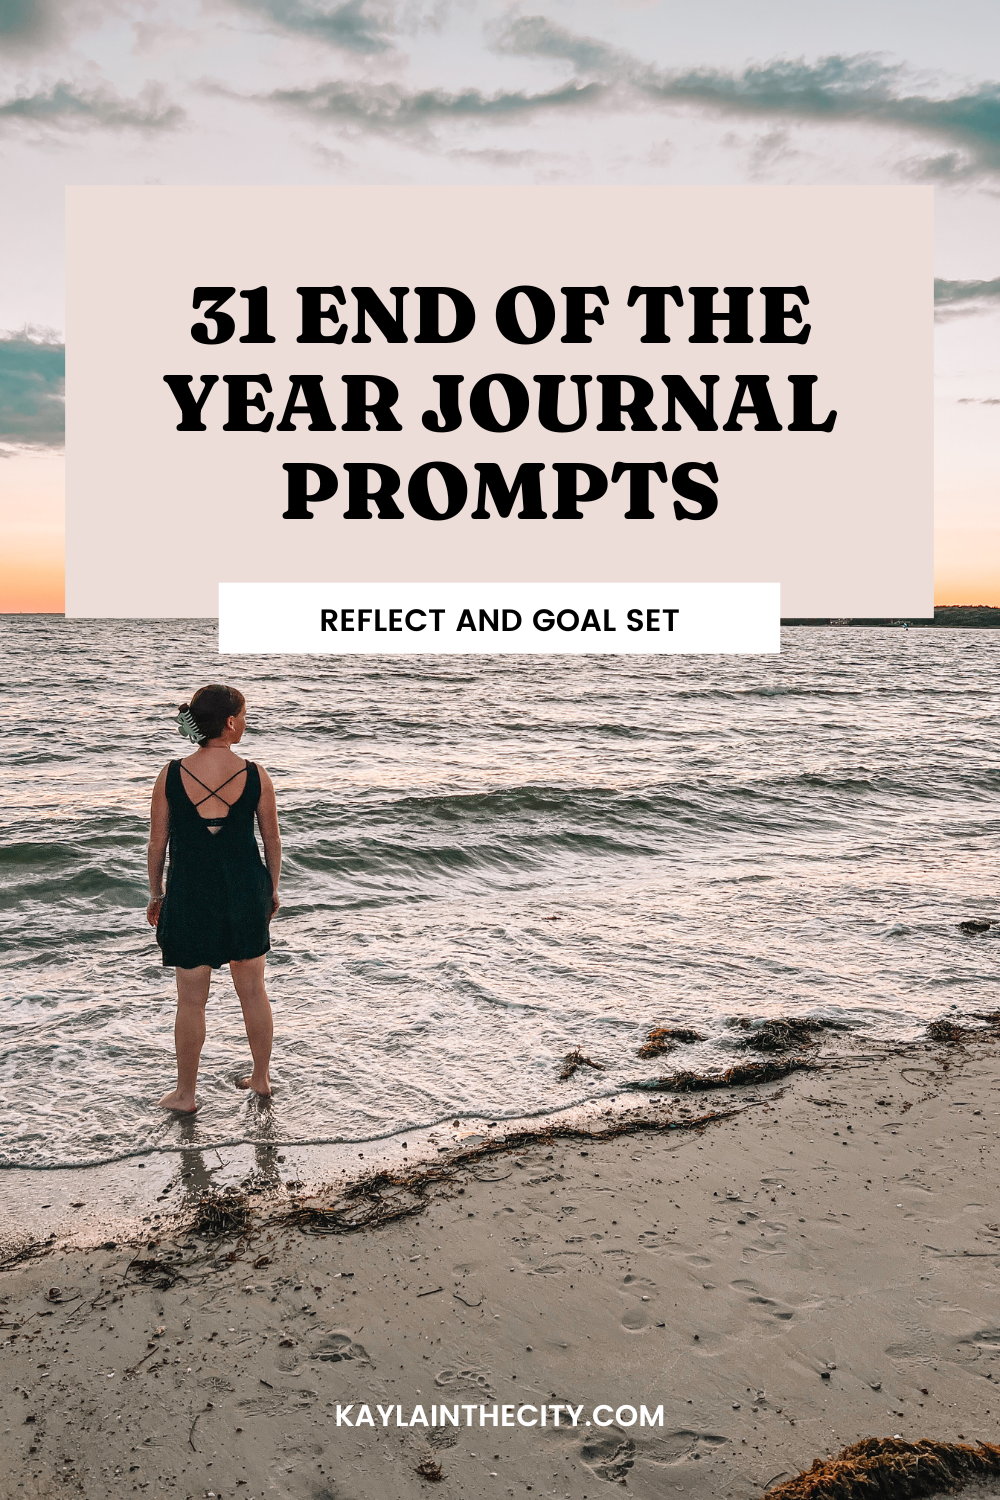 31 end of the year journal prompts